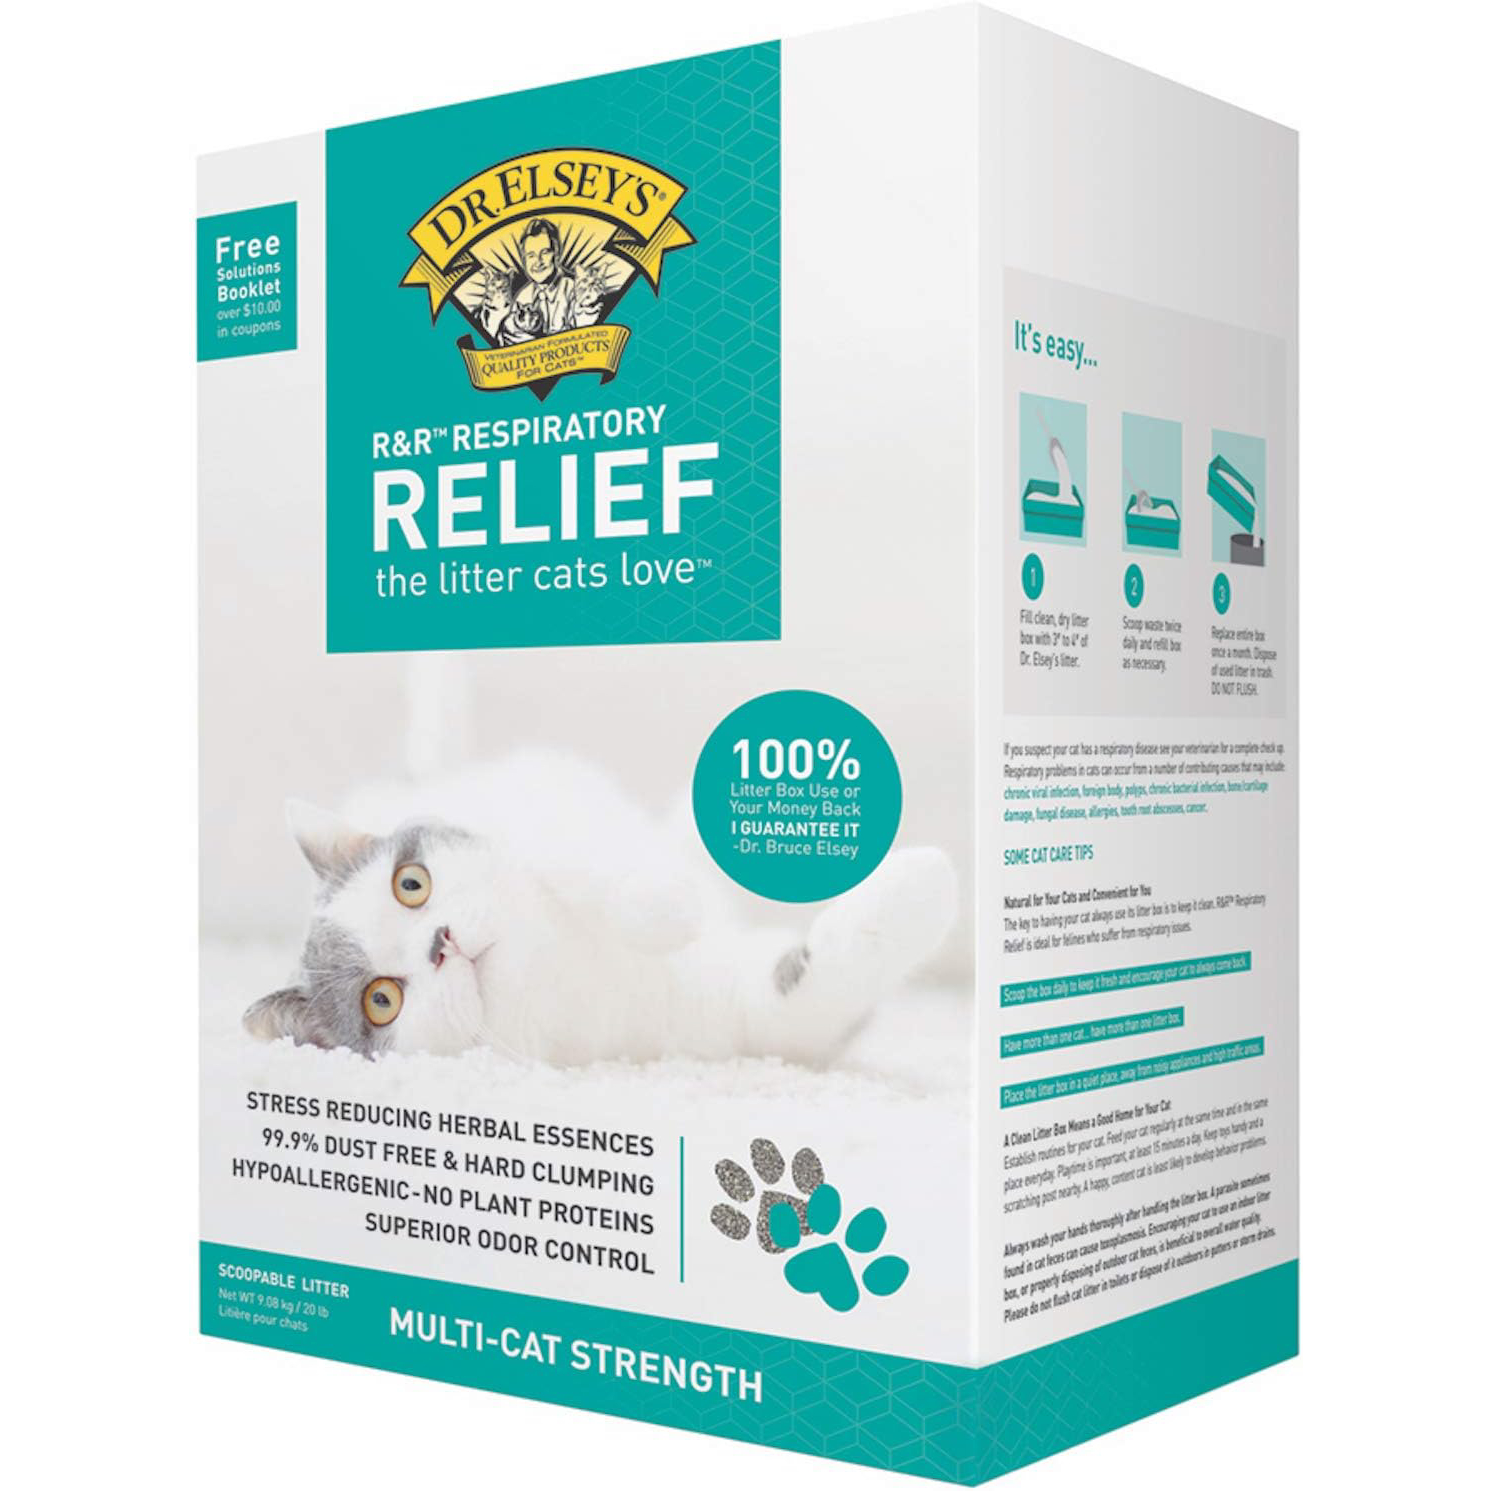 Precious cat Respiratory Releif Clay Premium All Natural cat Litter with Herbal Essences New